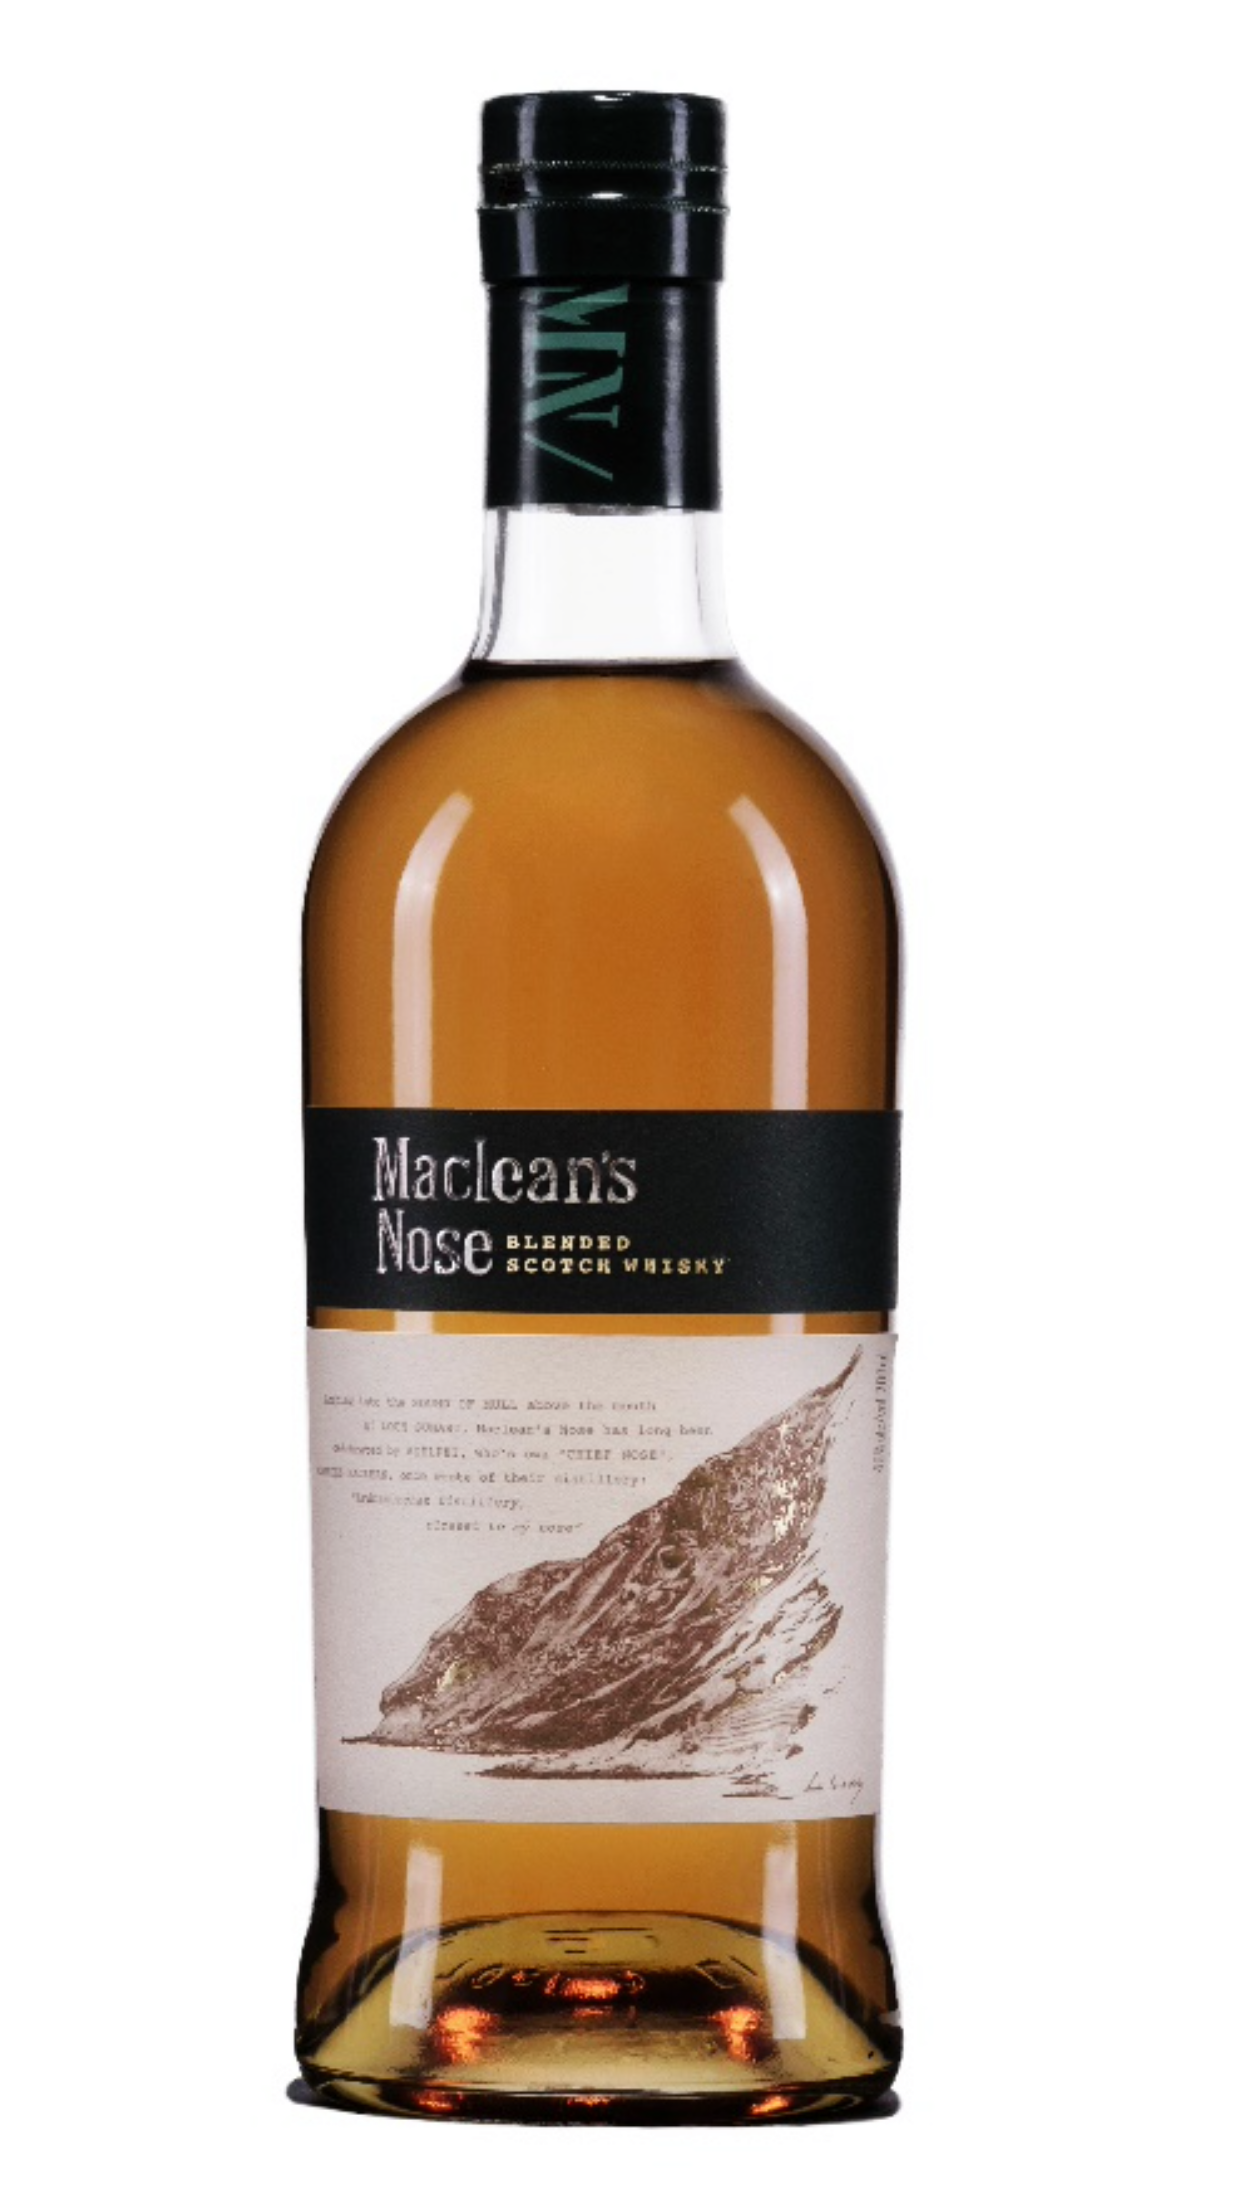 Maclean’s Nose blended whisky